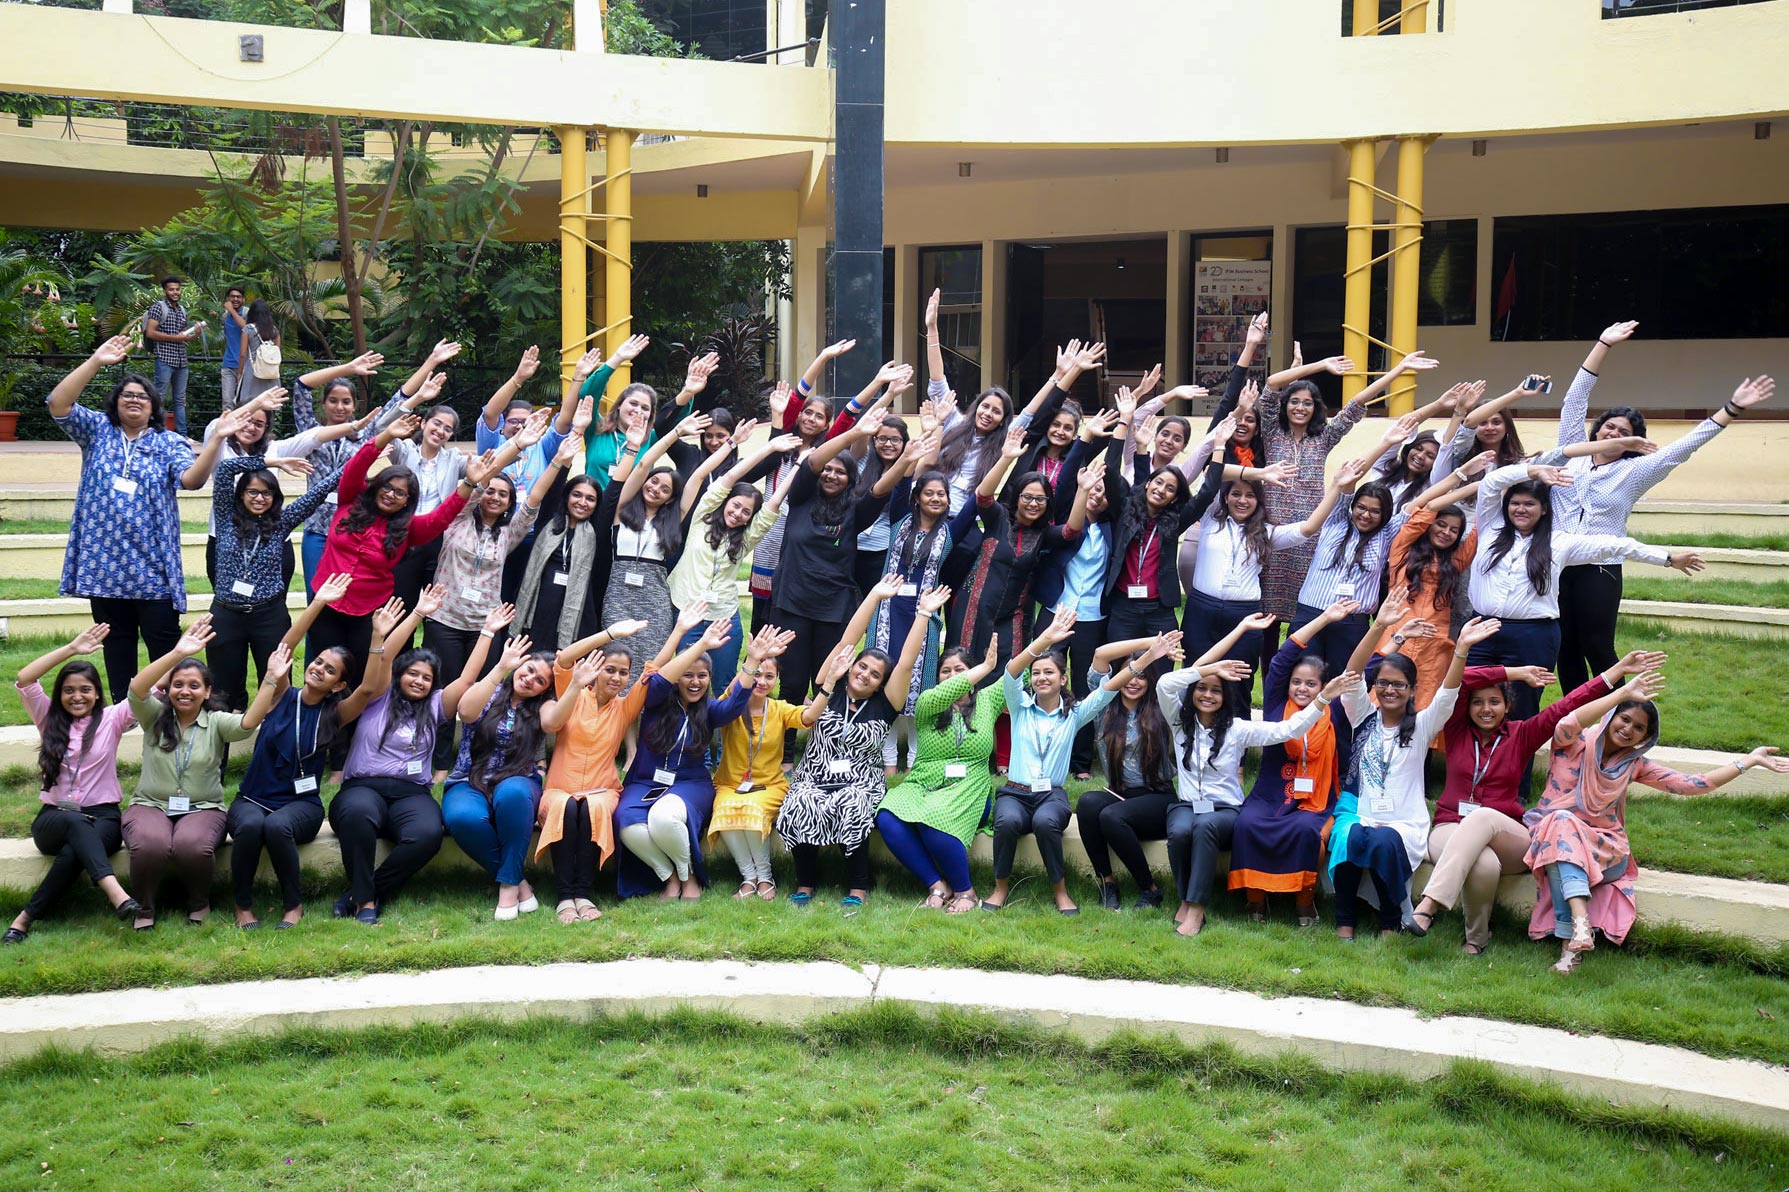 CFA Institute’s Young Women in Investment initiative take a group photo with their arms in the air leaning to the right of the image